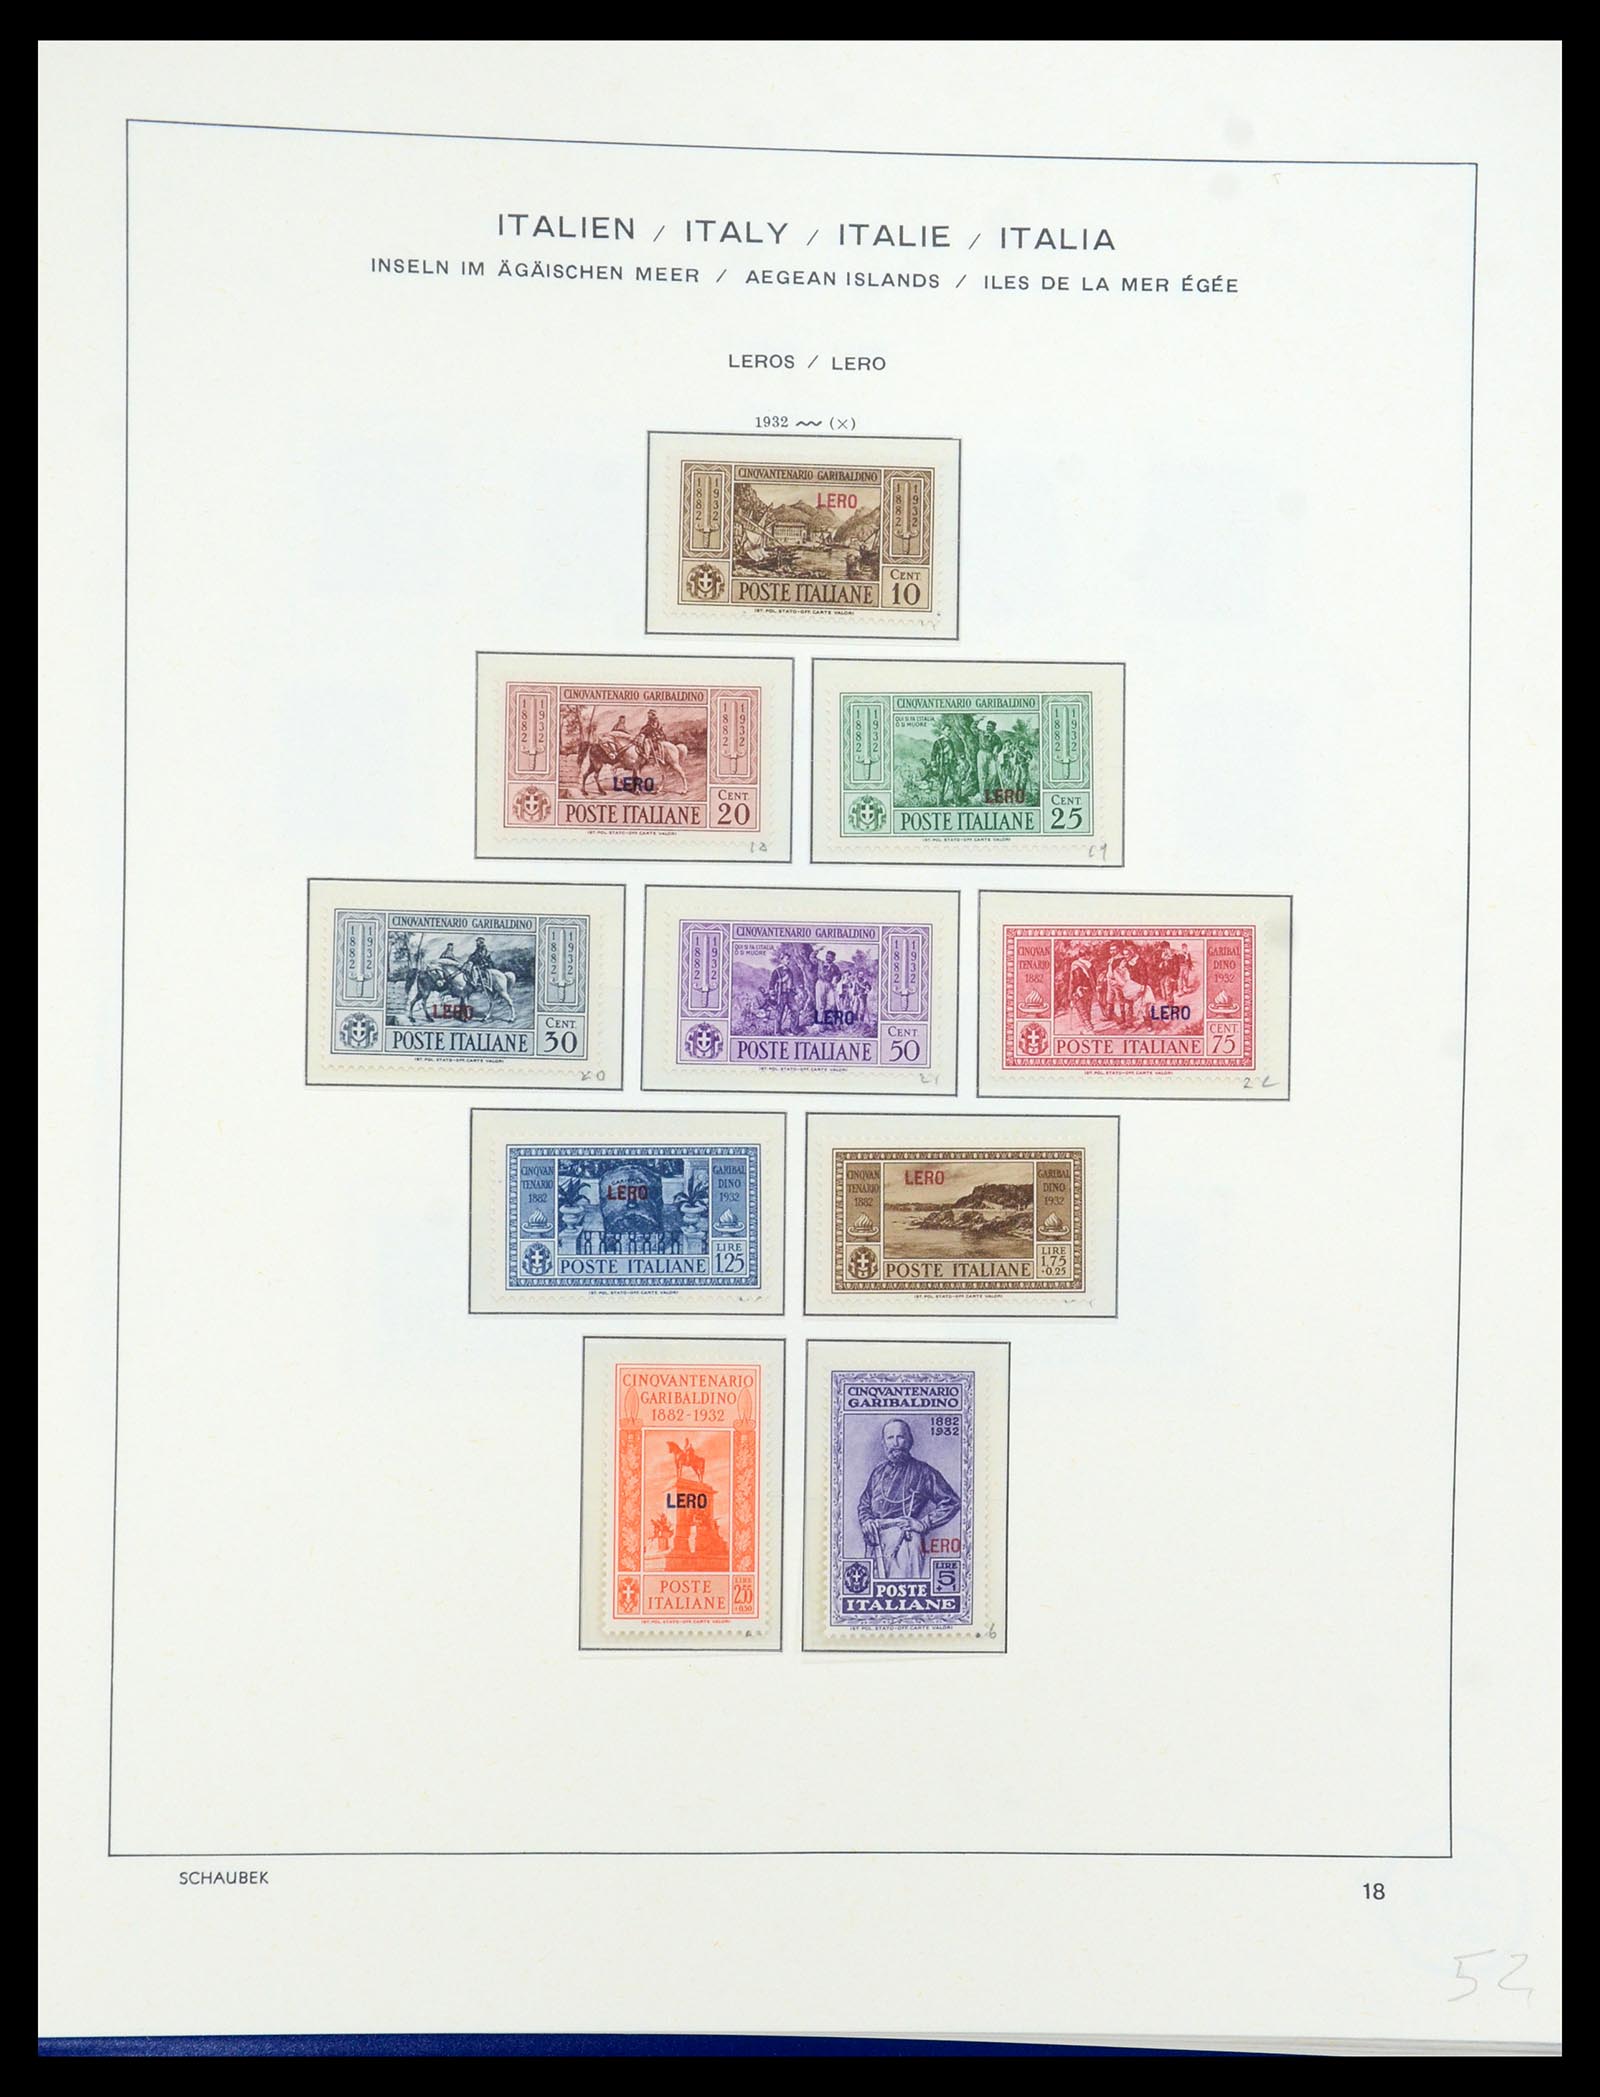 36181 023 - Stamp collection 36181 Italian Aegean Islands 1912-1941.